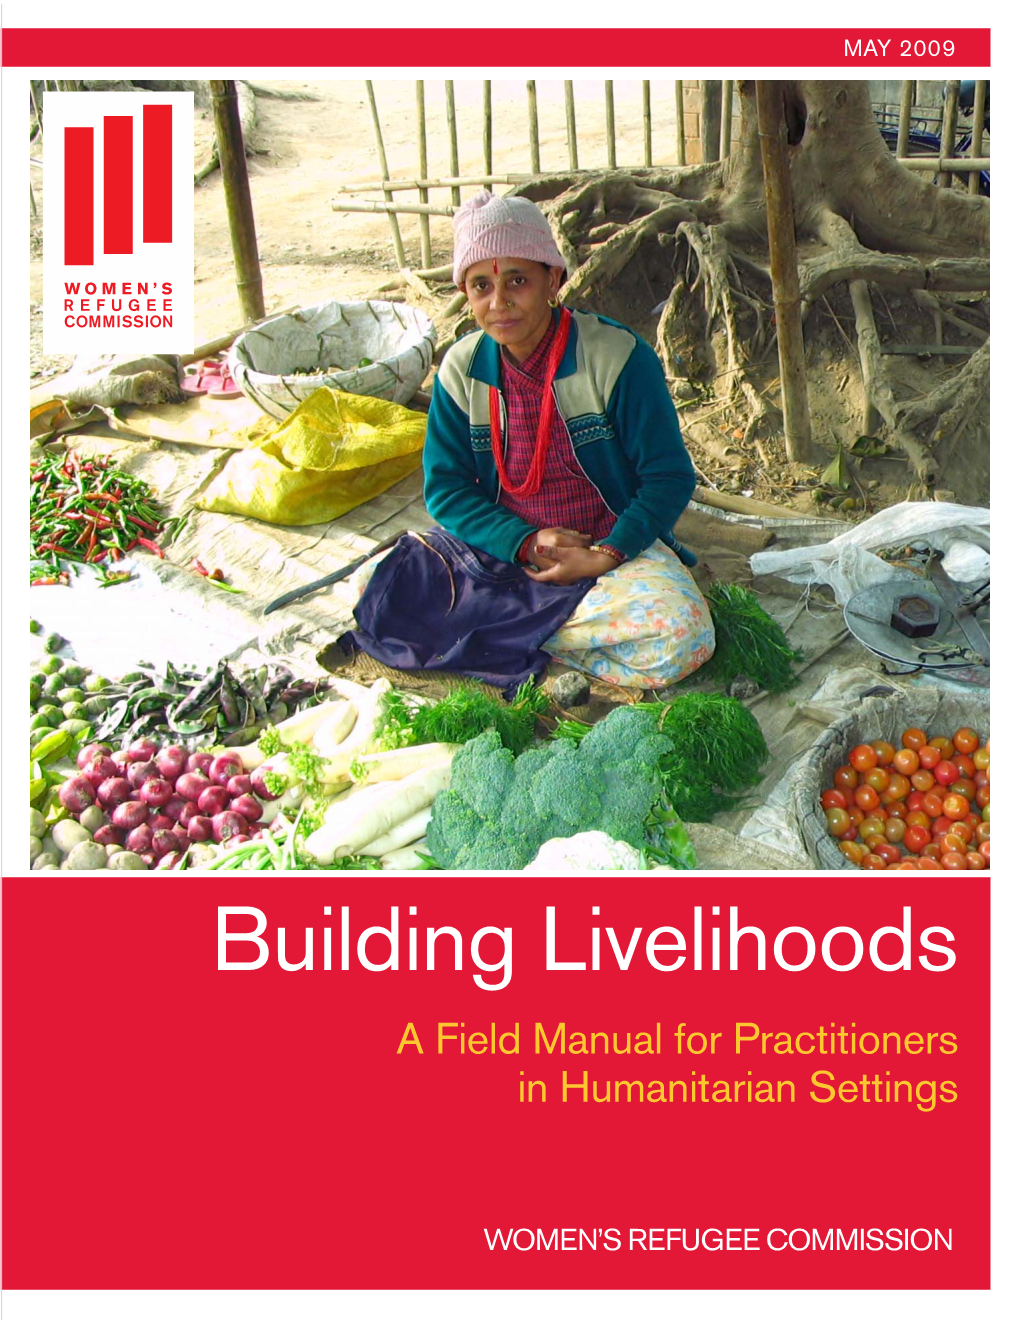 Women's Refugee Commission, Building Livelihoods: a Field Manual